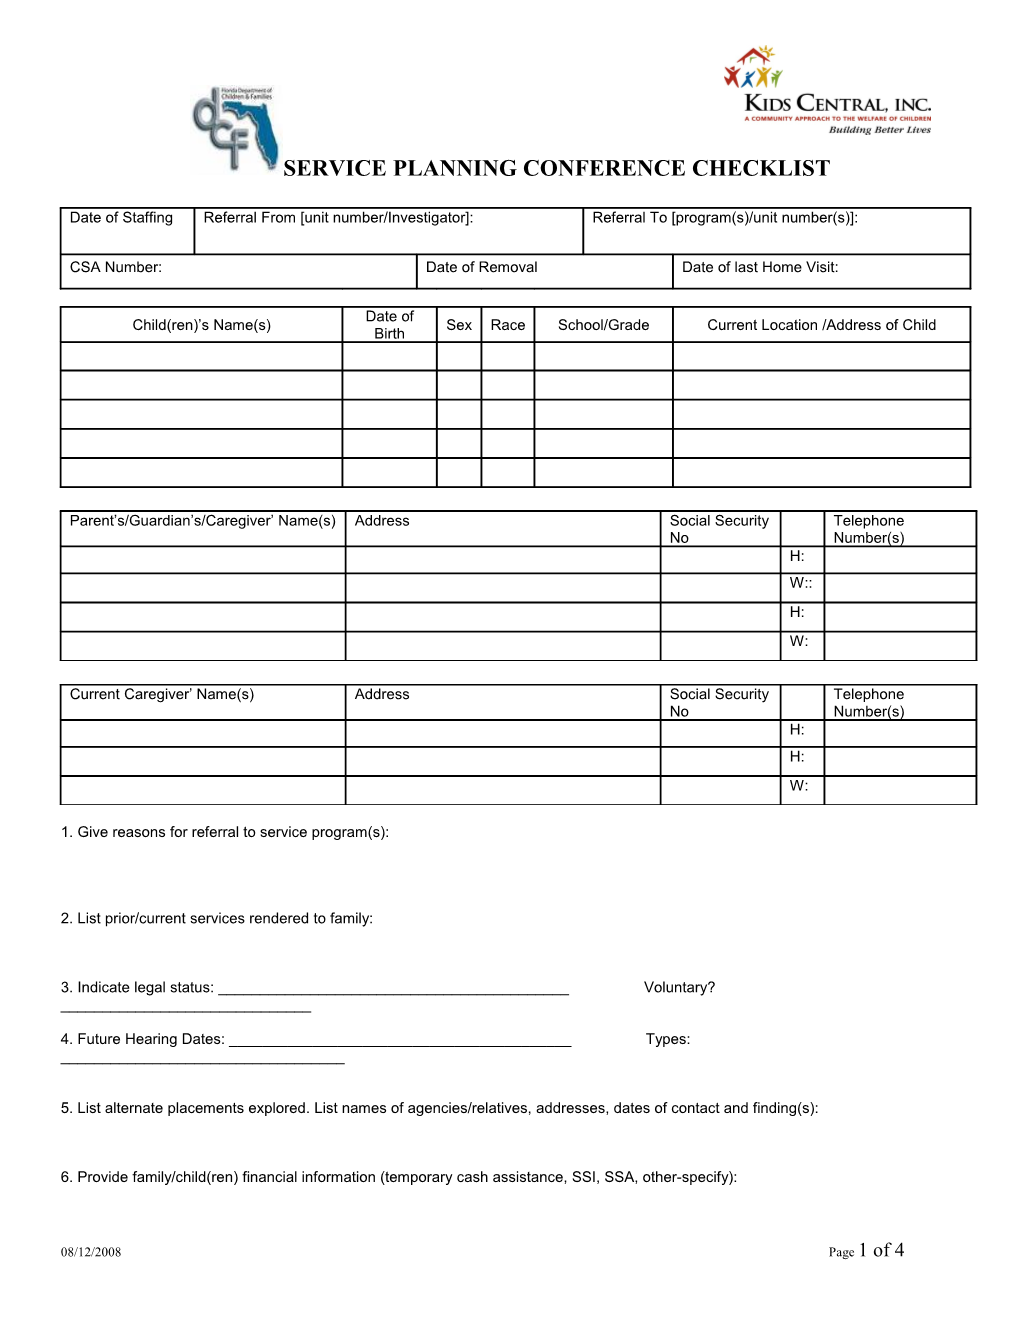 Service Planning Conference Checklist